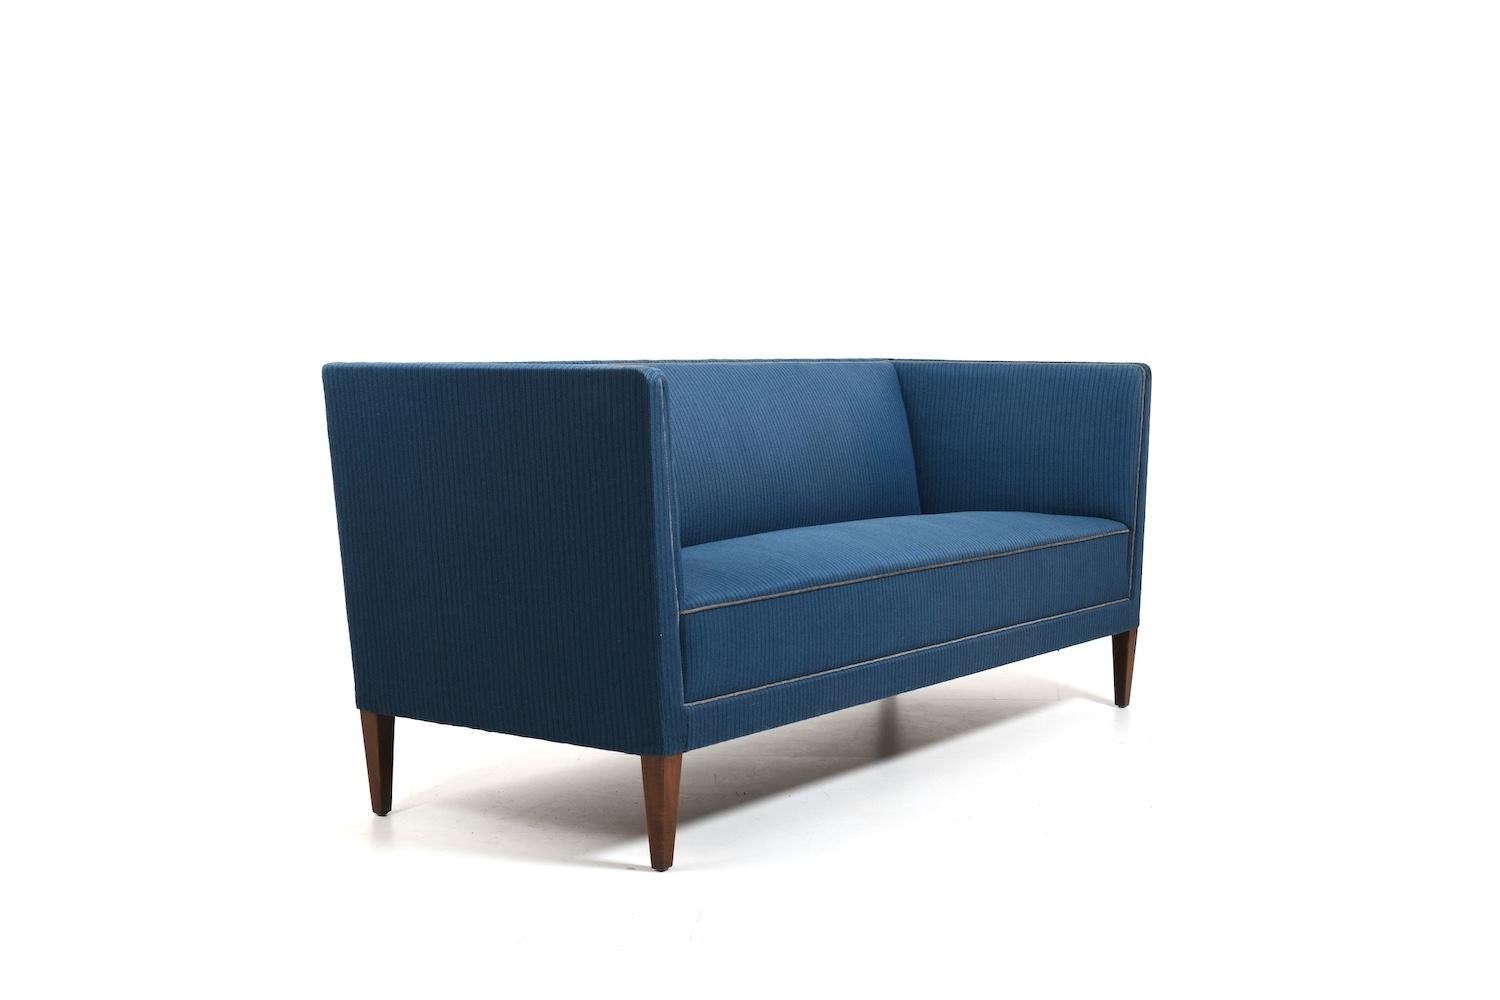 Three seat sofa by the famous danish cabinetmaker and designer Frits Henningsen 1930s. In original untouched condition, with blue fabric. This is upholstered by Frits henningsen's favorite upholsterer Holger Post. Very fine quality.

Provenance